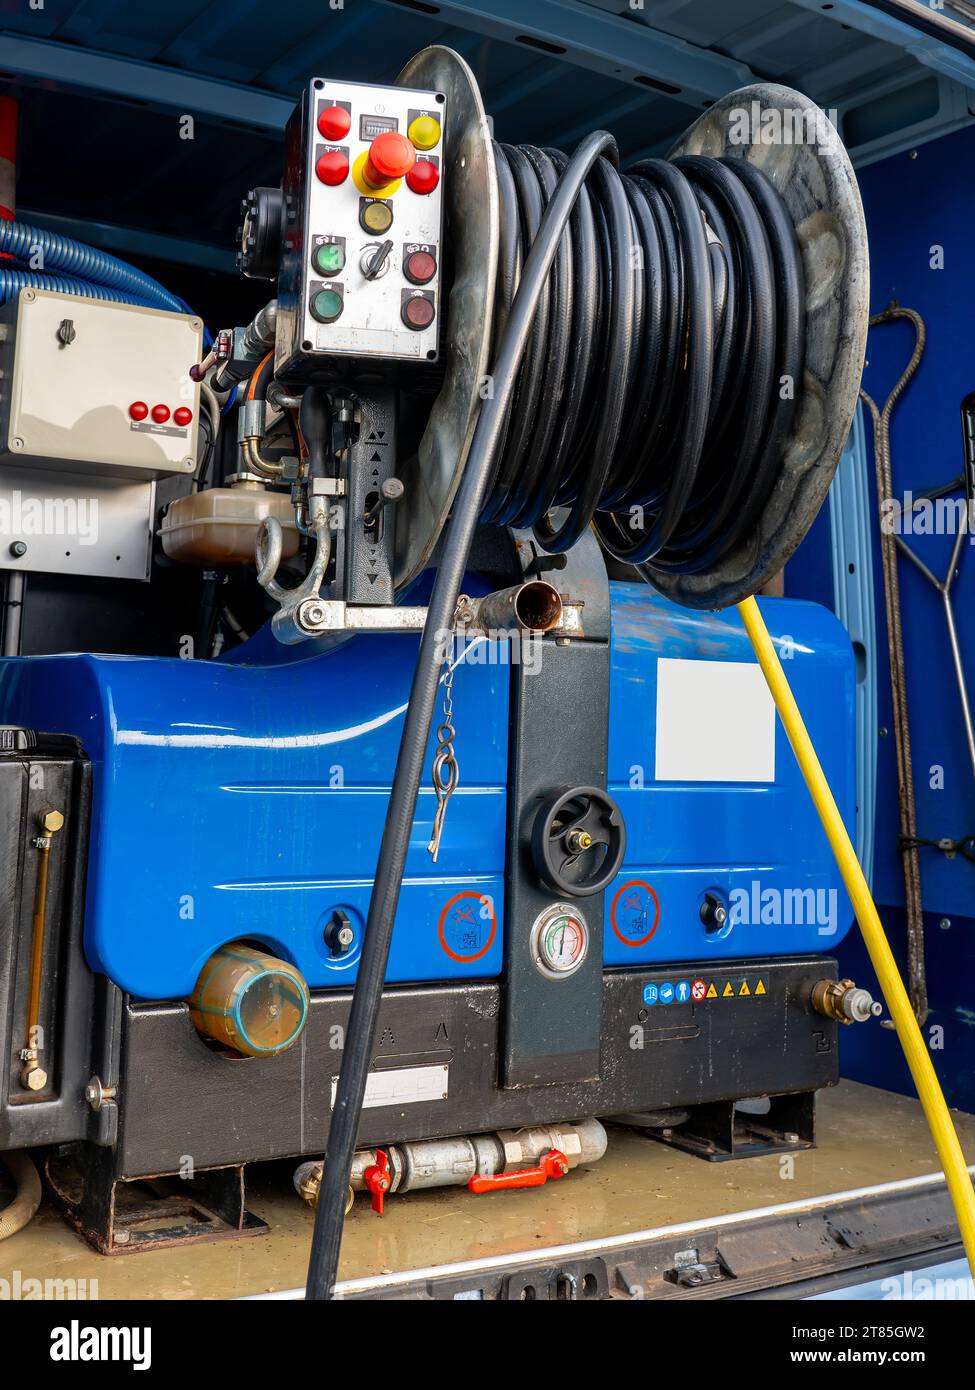 Sewer cleaning equipment service vehicle. Equipment for hydraulic flushing of urban sewerage. control panel, hoses, pumps, pressure gauges Stock Photo